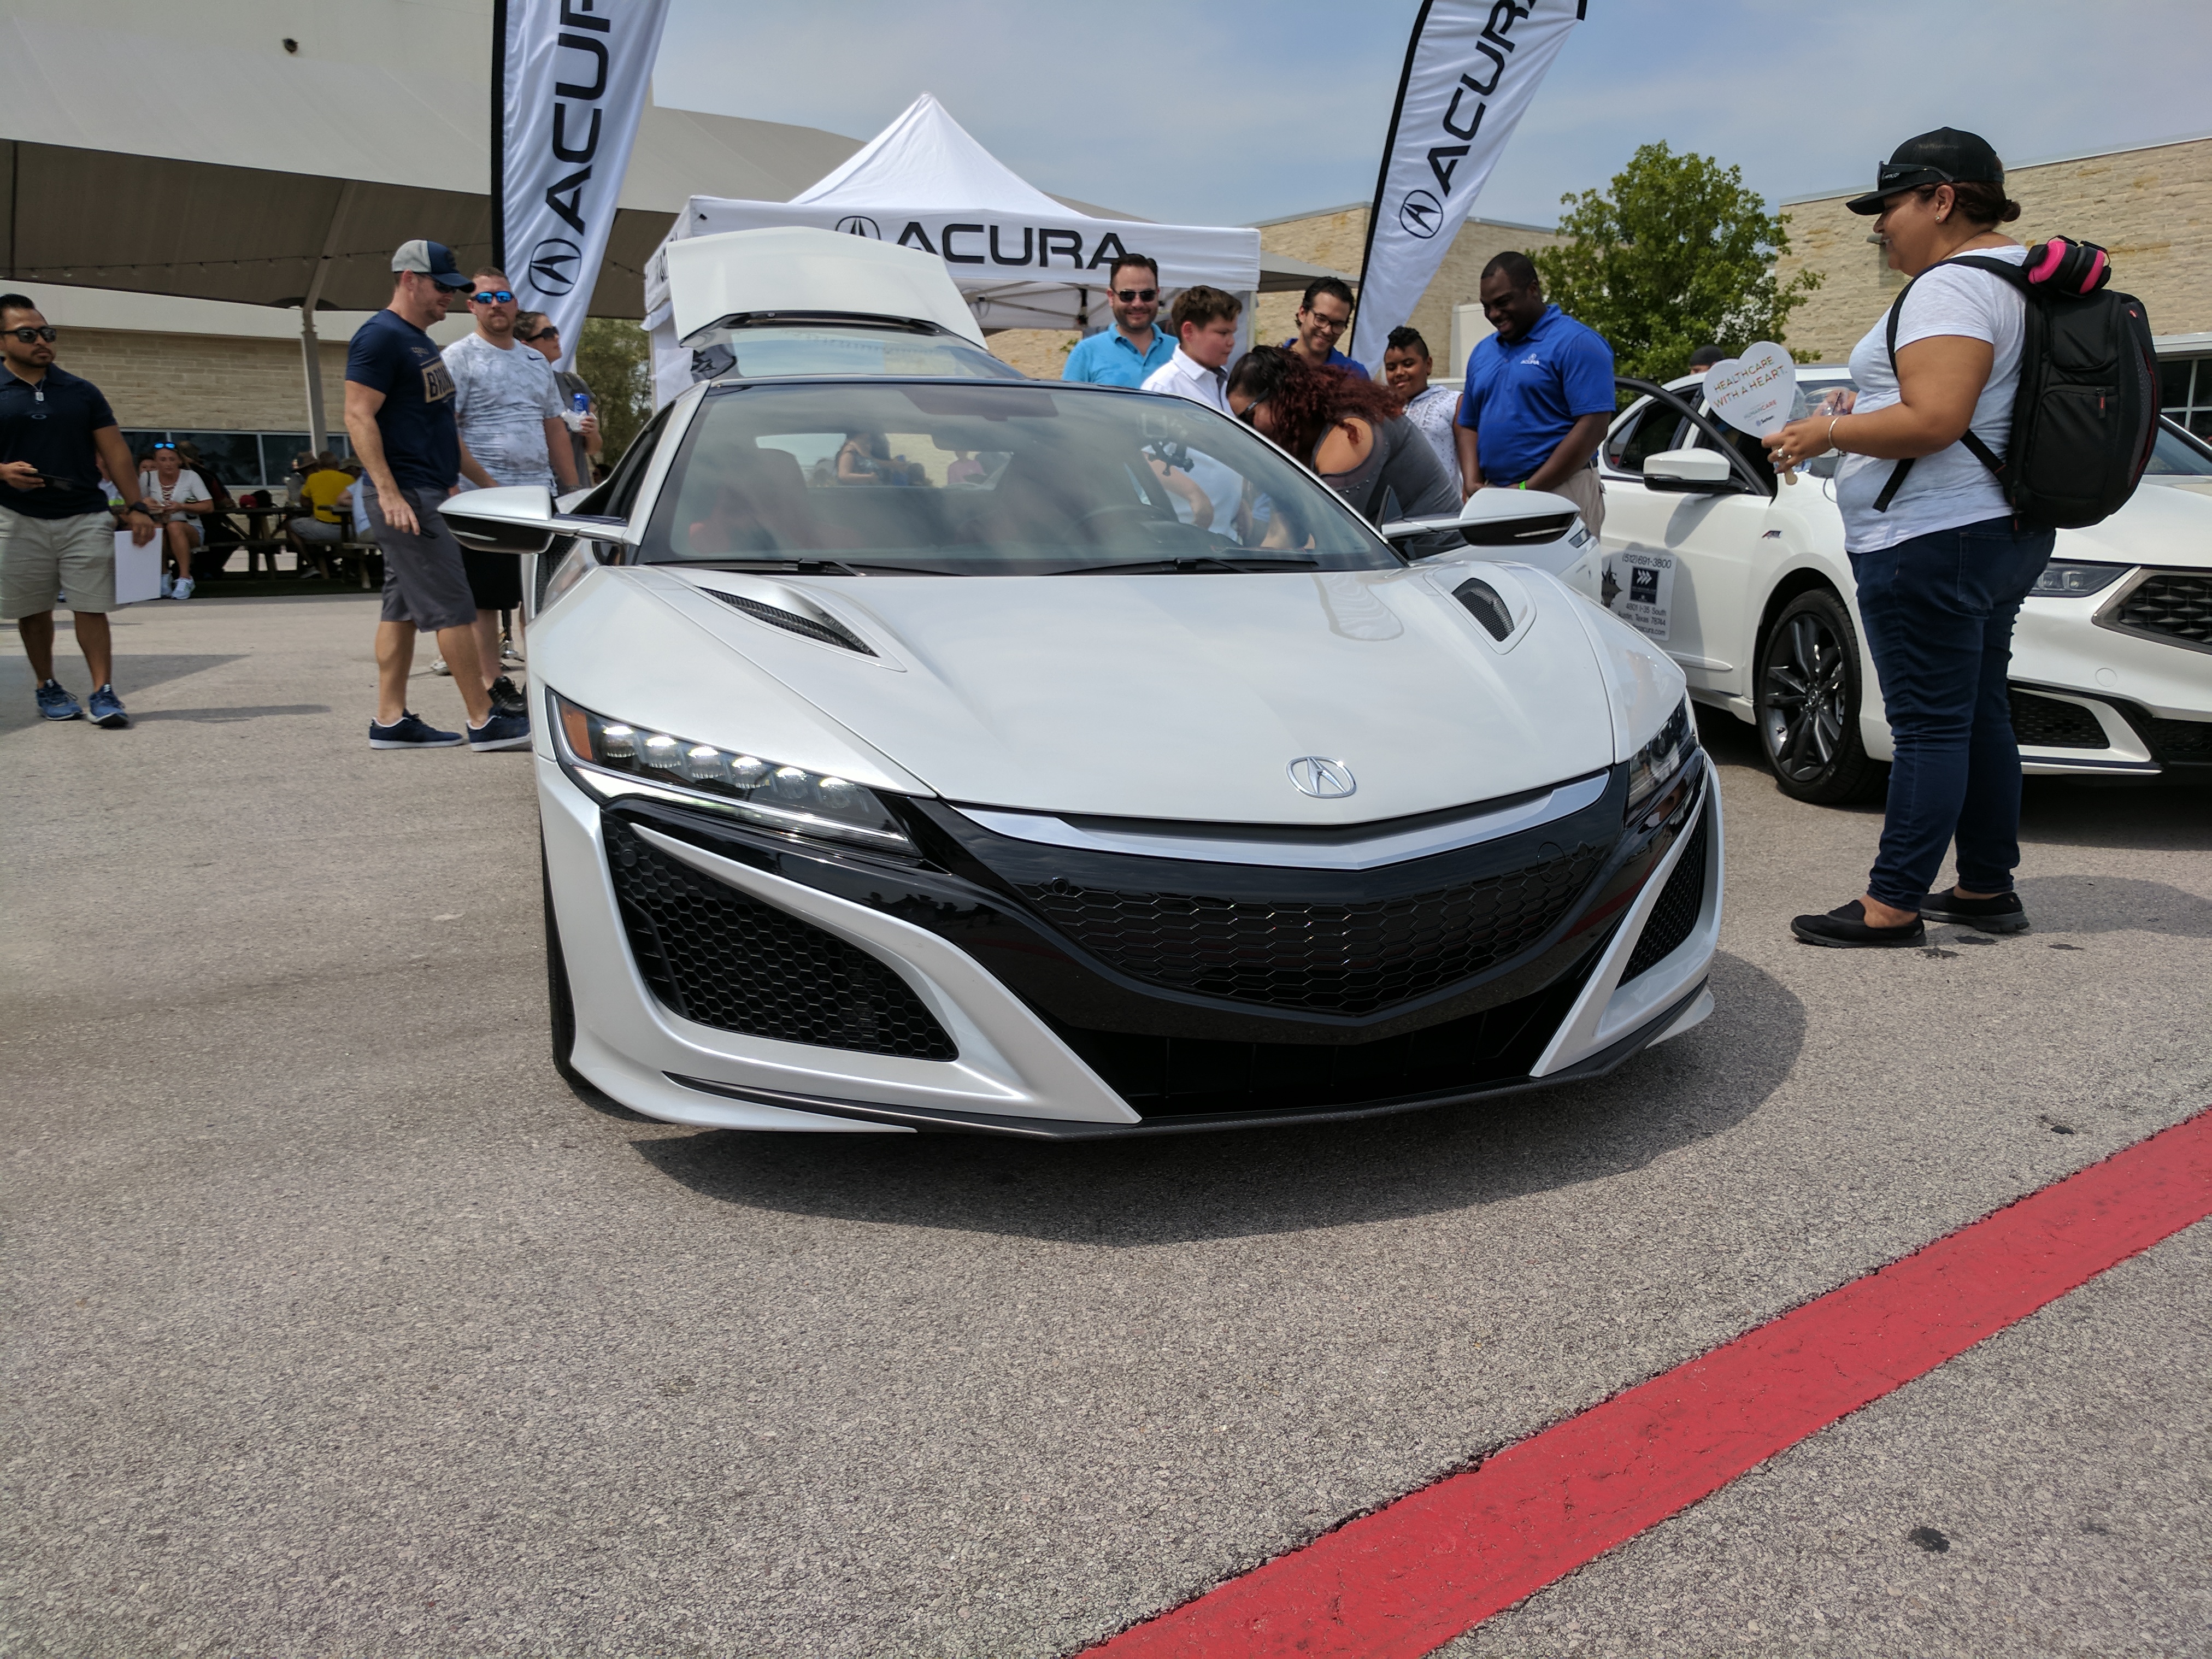 An NSX was on display as well.  I had the chance to sit in it and rev it a bit.  